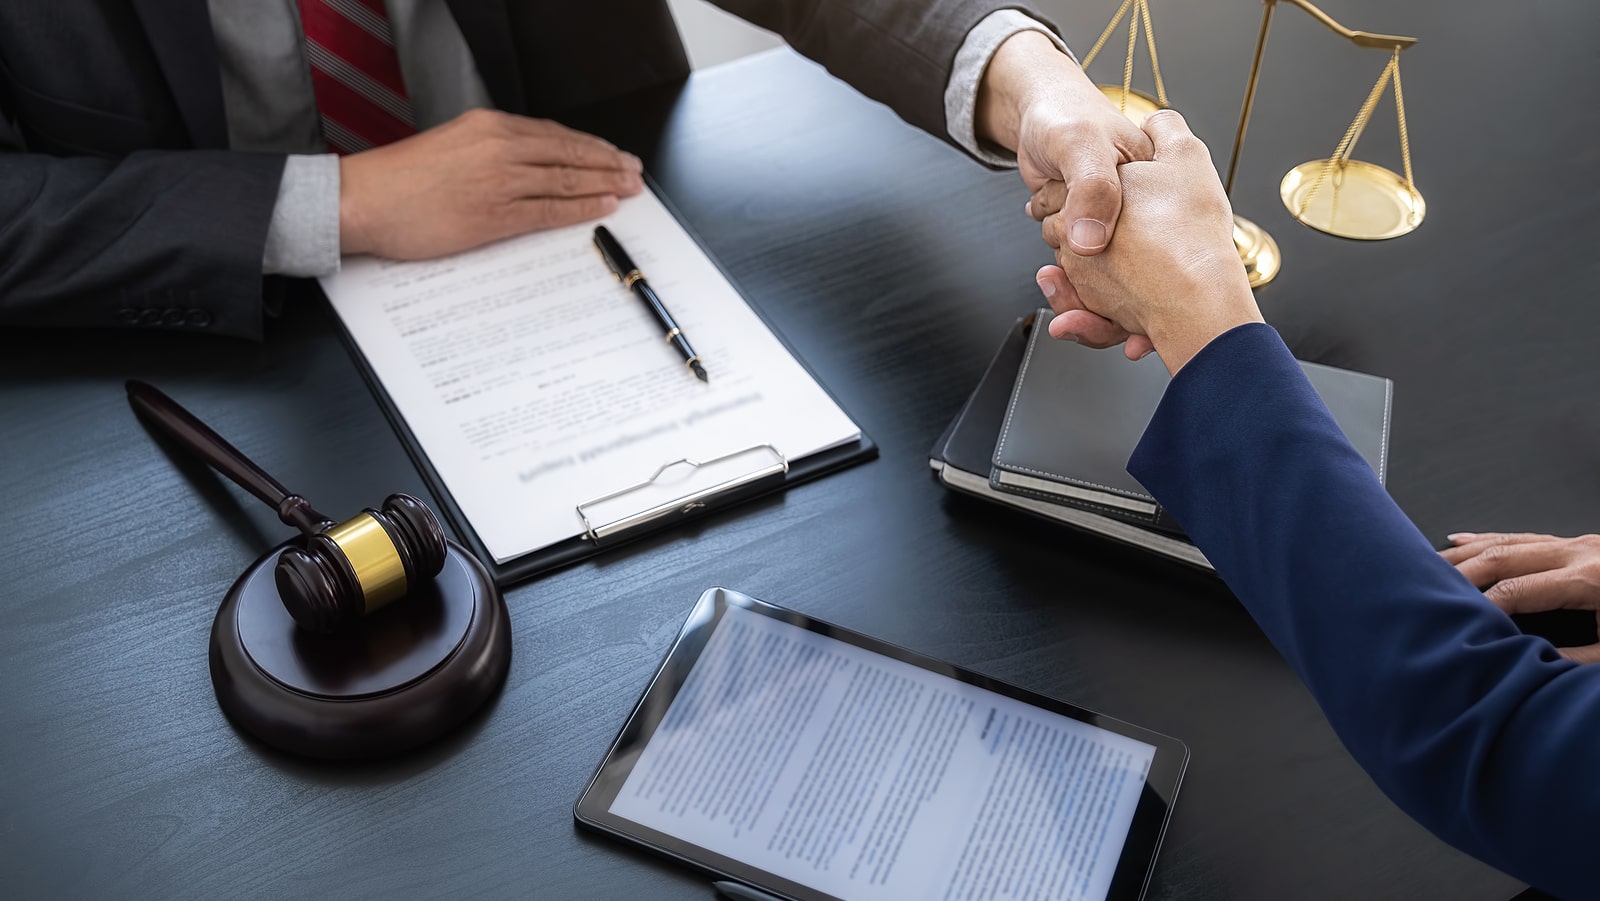 Image of a probate attorney shaking hands with a client over some documents and contracts on a table